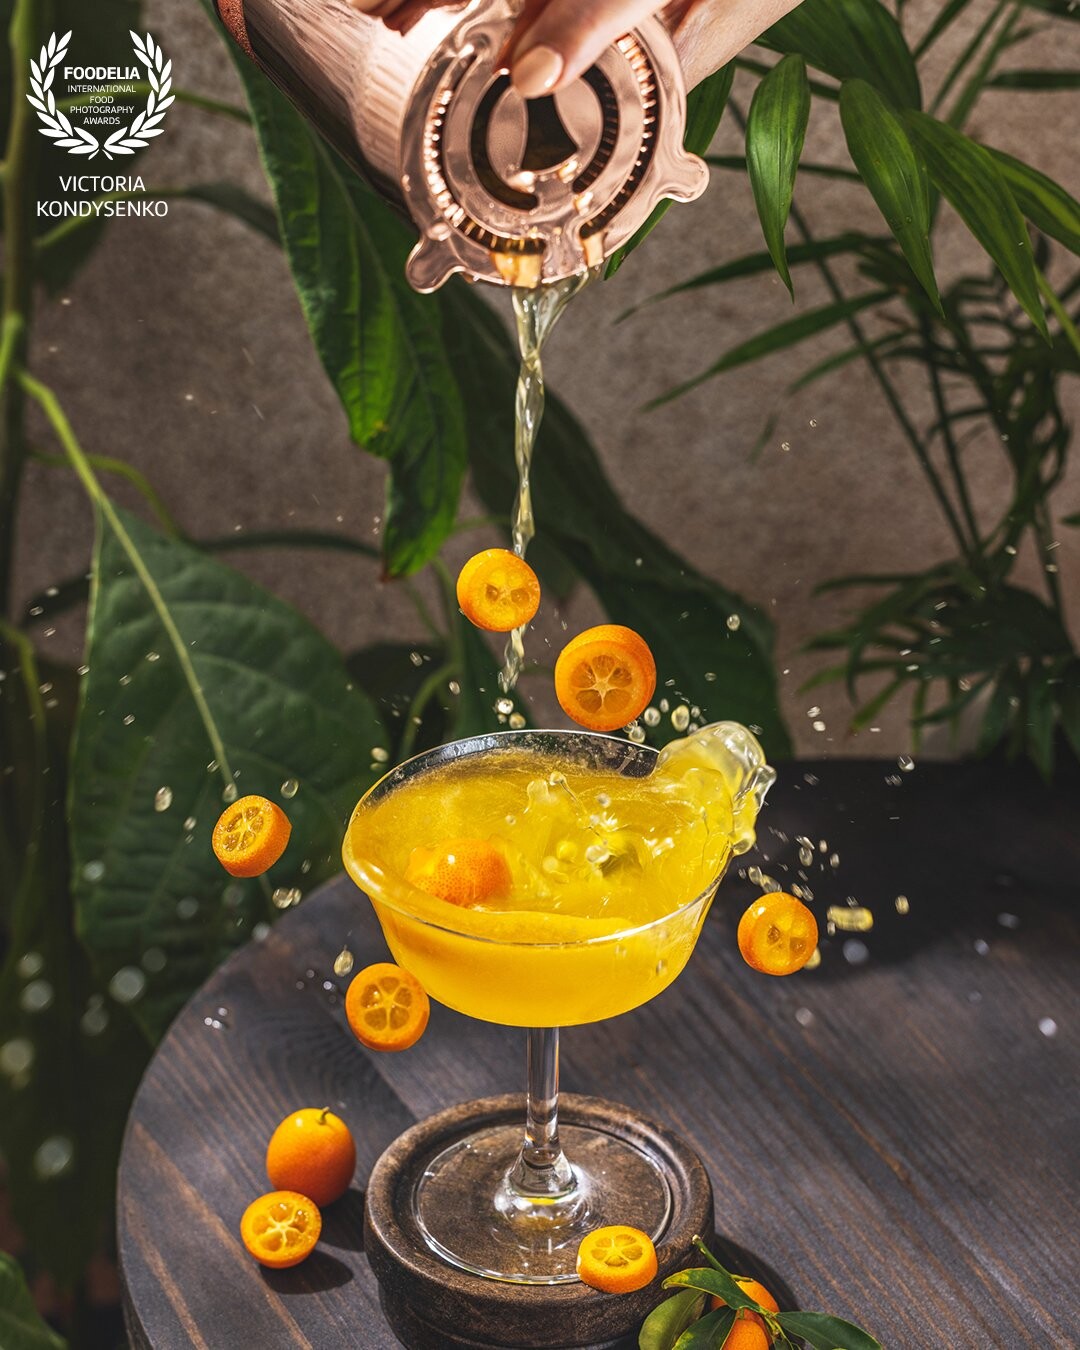 This stunning Kumquat and Thyme Cocktail is simple, unfussy, and elegant. Kumquats and thyme get muddled together with a dash of honey then shaken with vodka and ice until chilled. A splash of ginger beer adds effervescence, sweetness and slight spice to create a dimensional and crowd-pleasing citrus vodka cocktail.